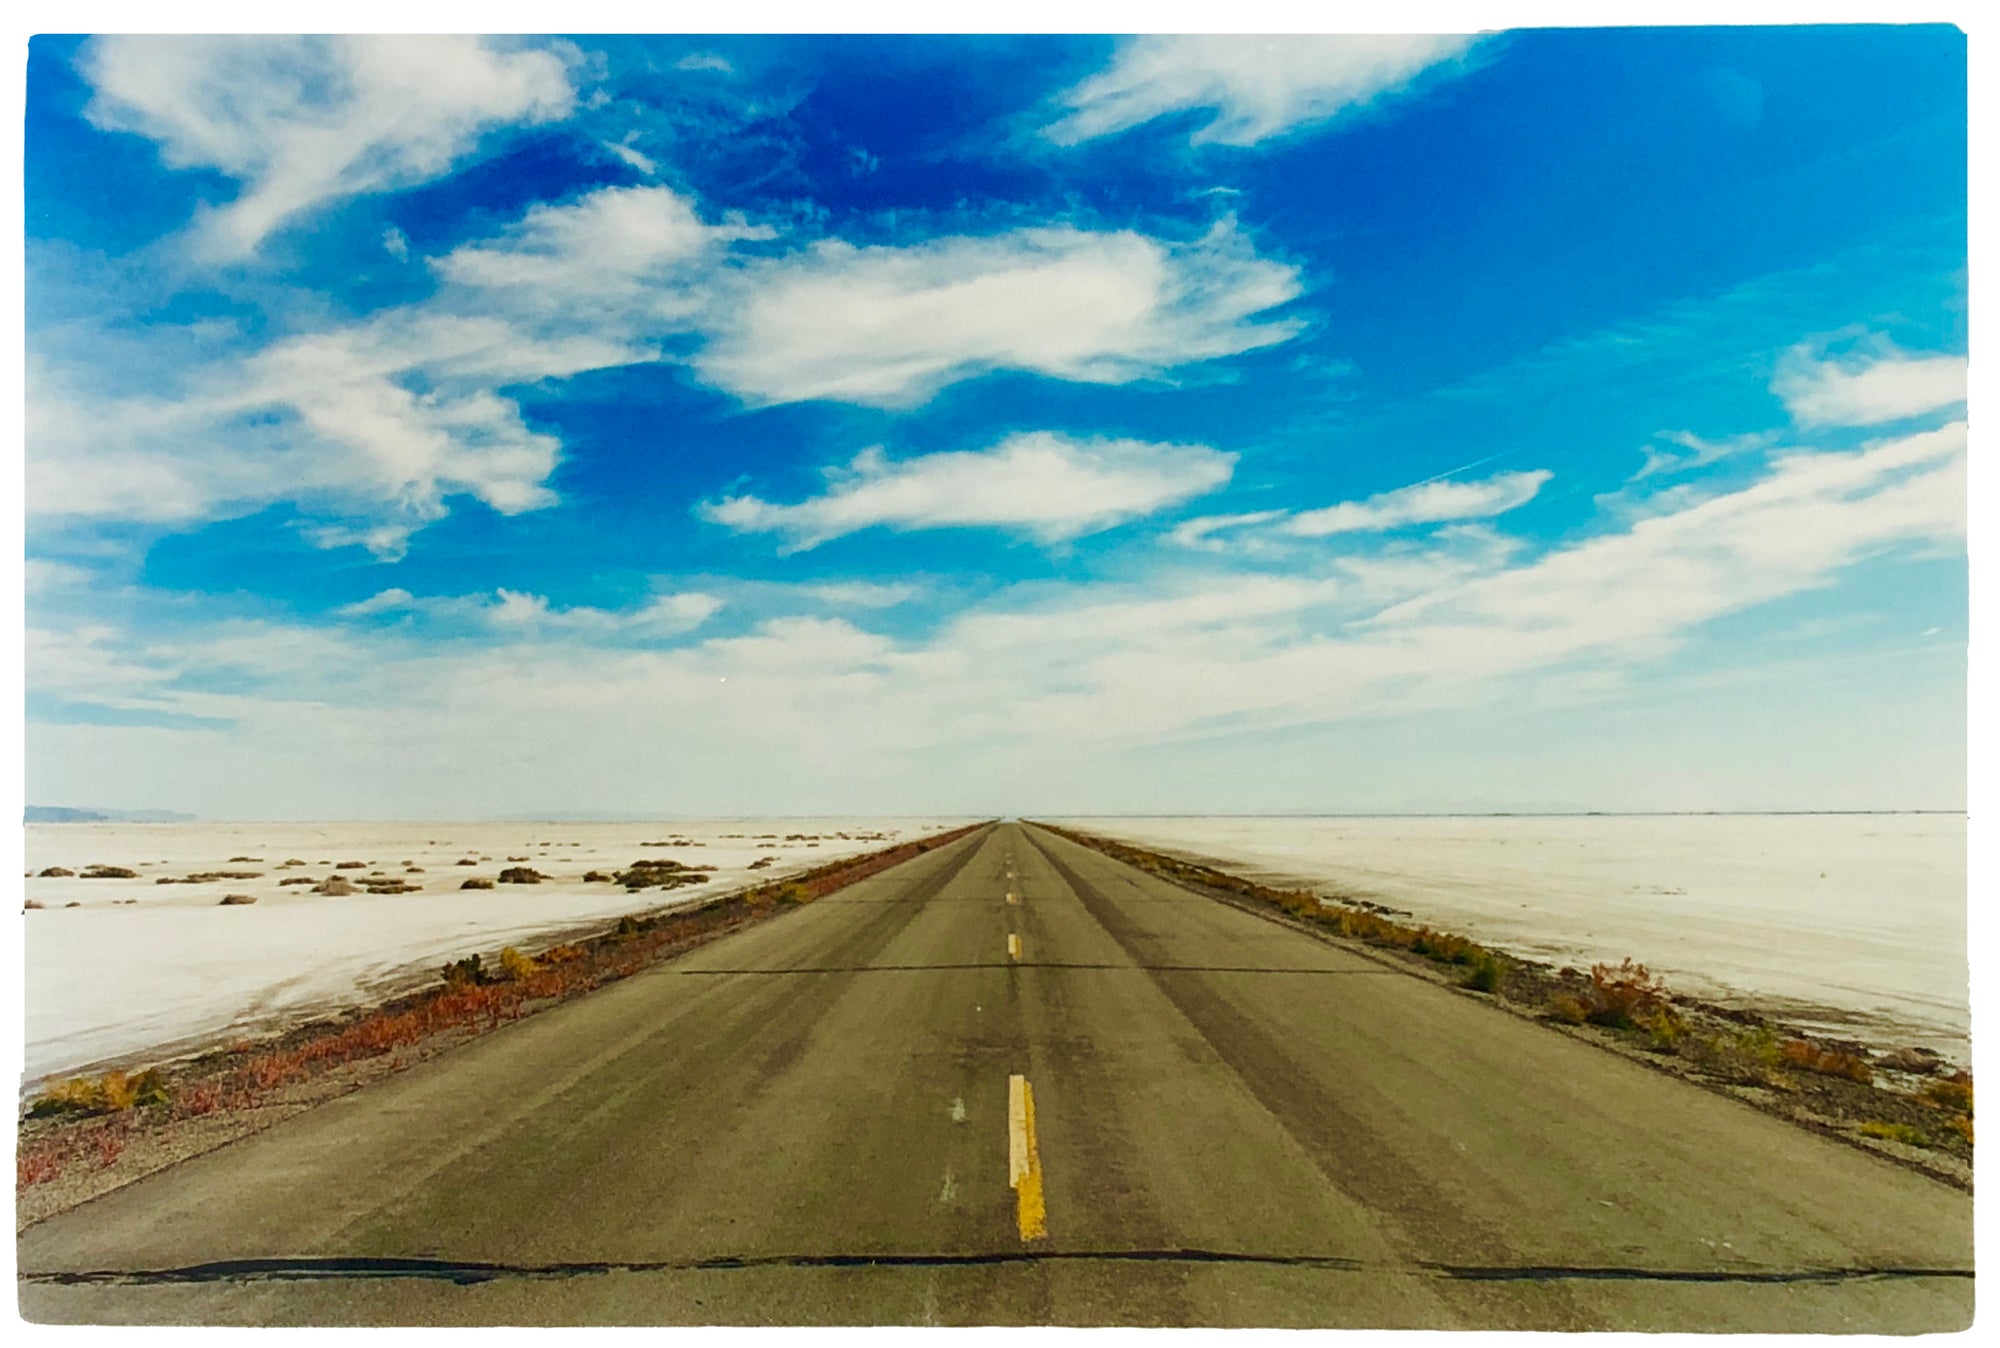 Photograph by Richard Heeps.  In the centre of the empty approach road going off into the distance, blue skies and white clouds fill the sky and either side of the road the flat salt plains.